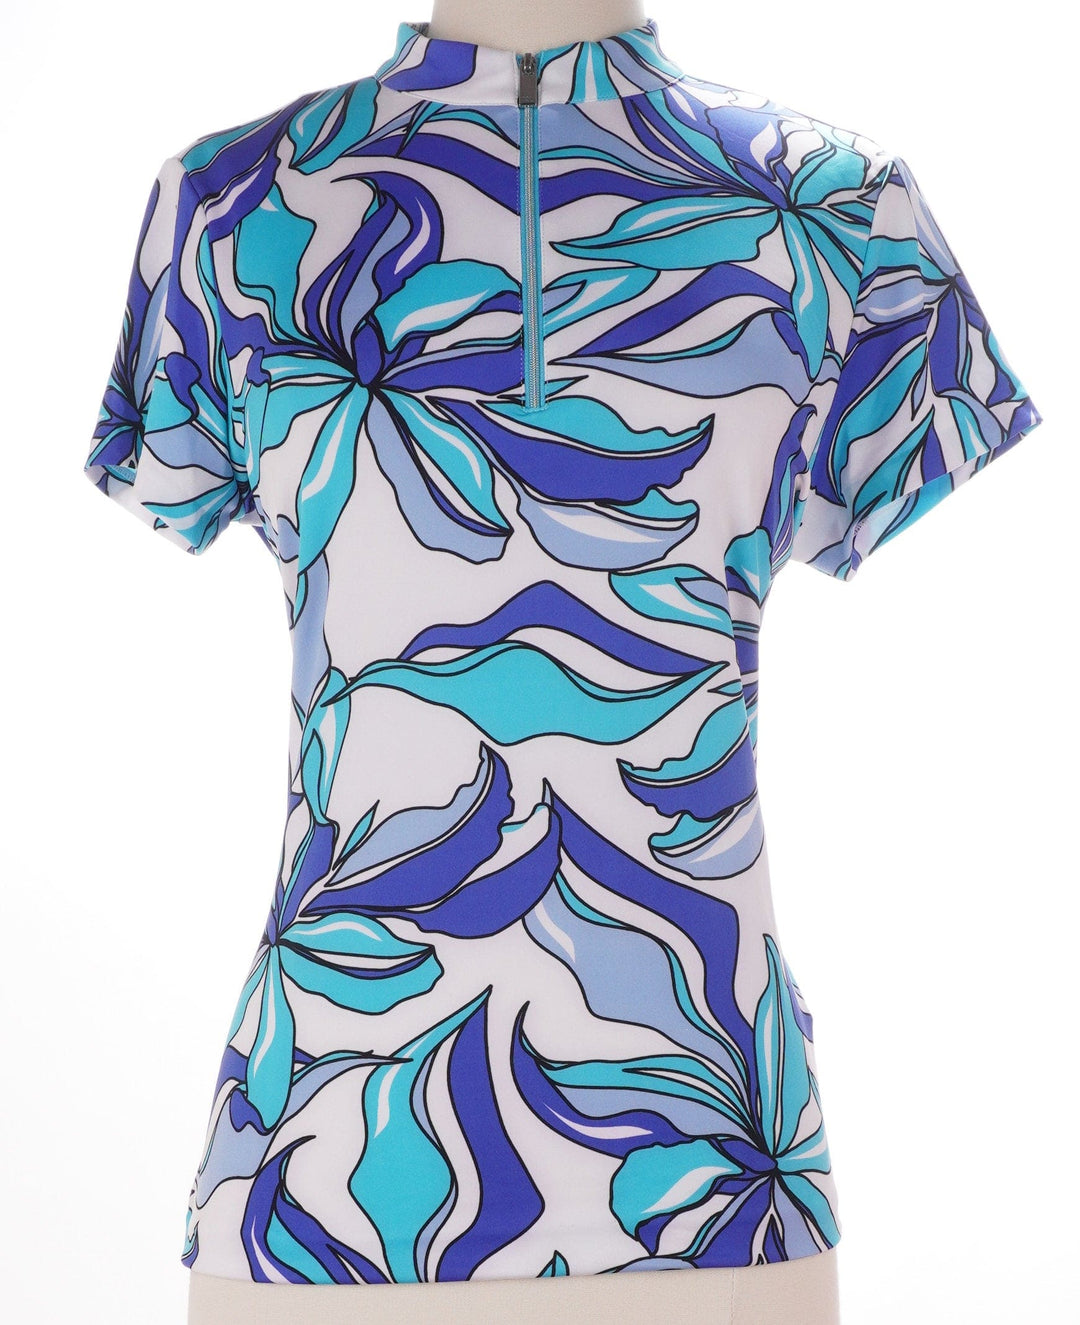 Tail Blue / Small / Exclusive New Product Tail Short Sleeve Top - Layered Lily - Size Small